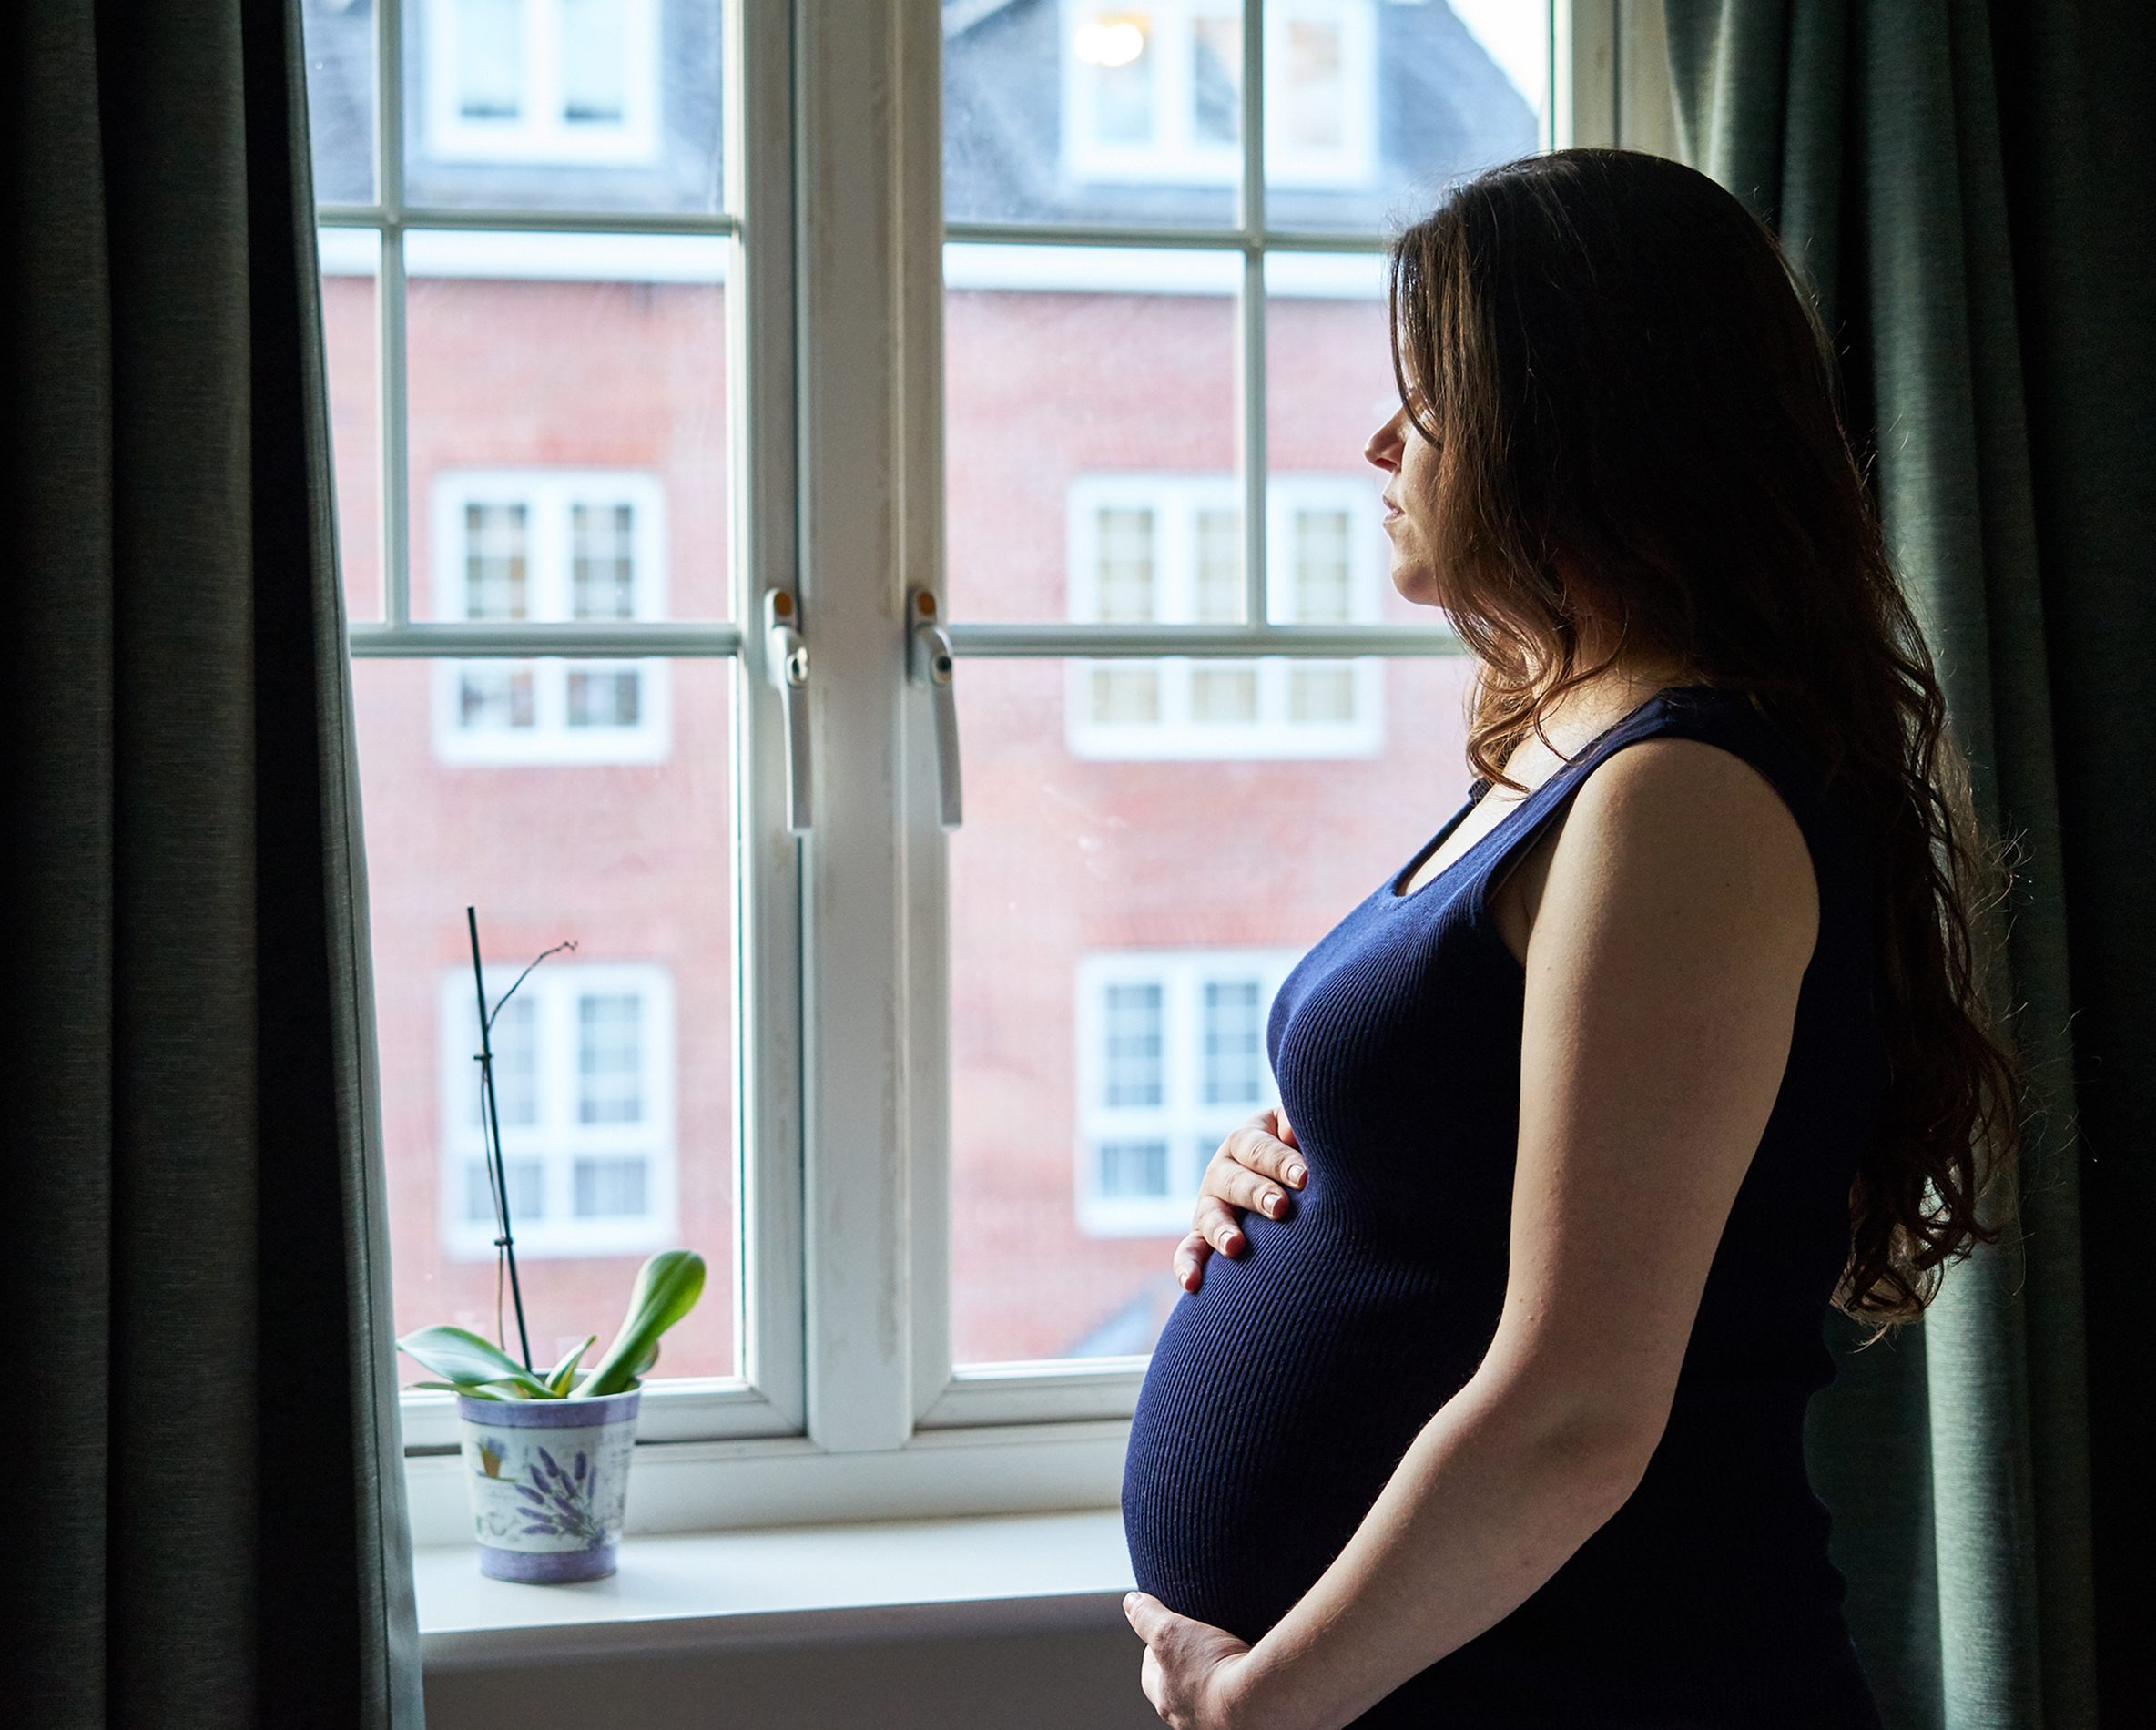 A pregnant woman looking outside a window | Source: Shutterstock